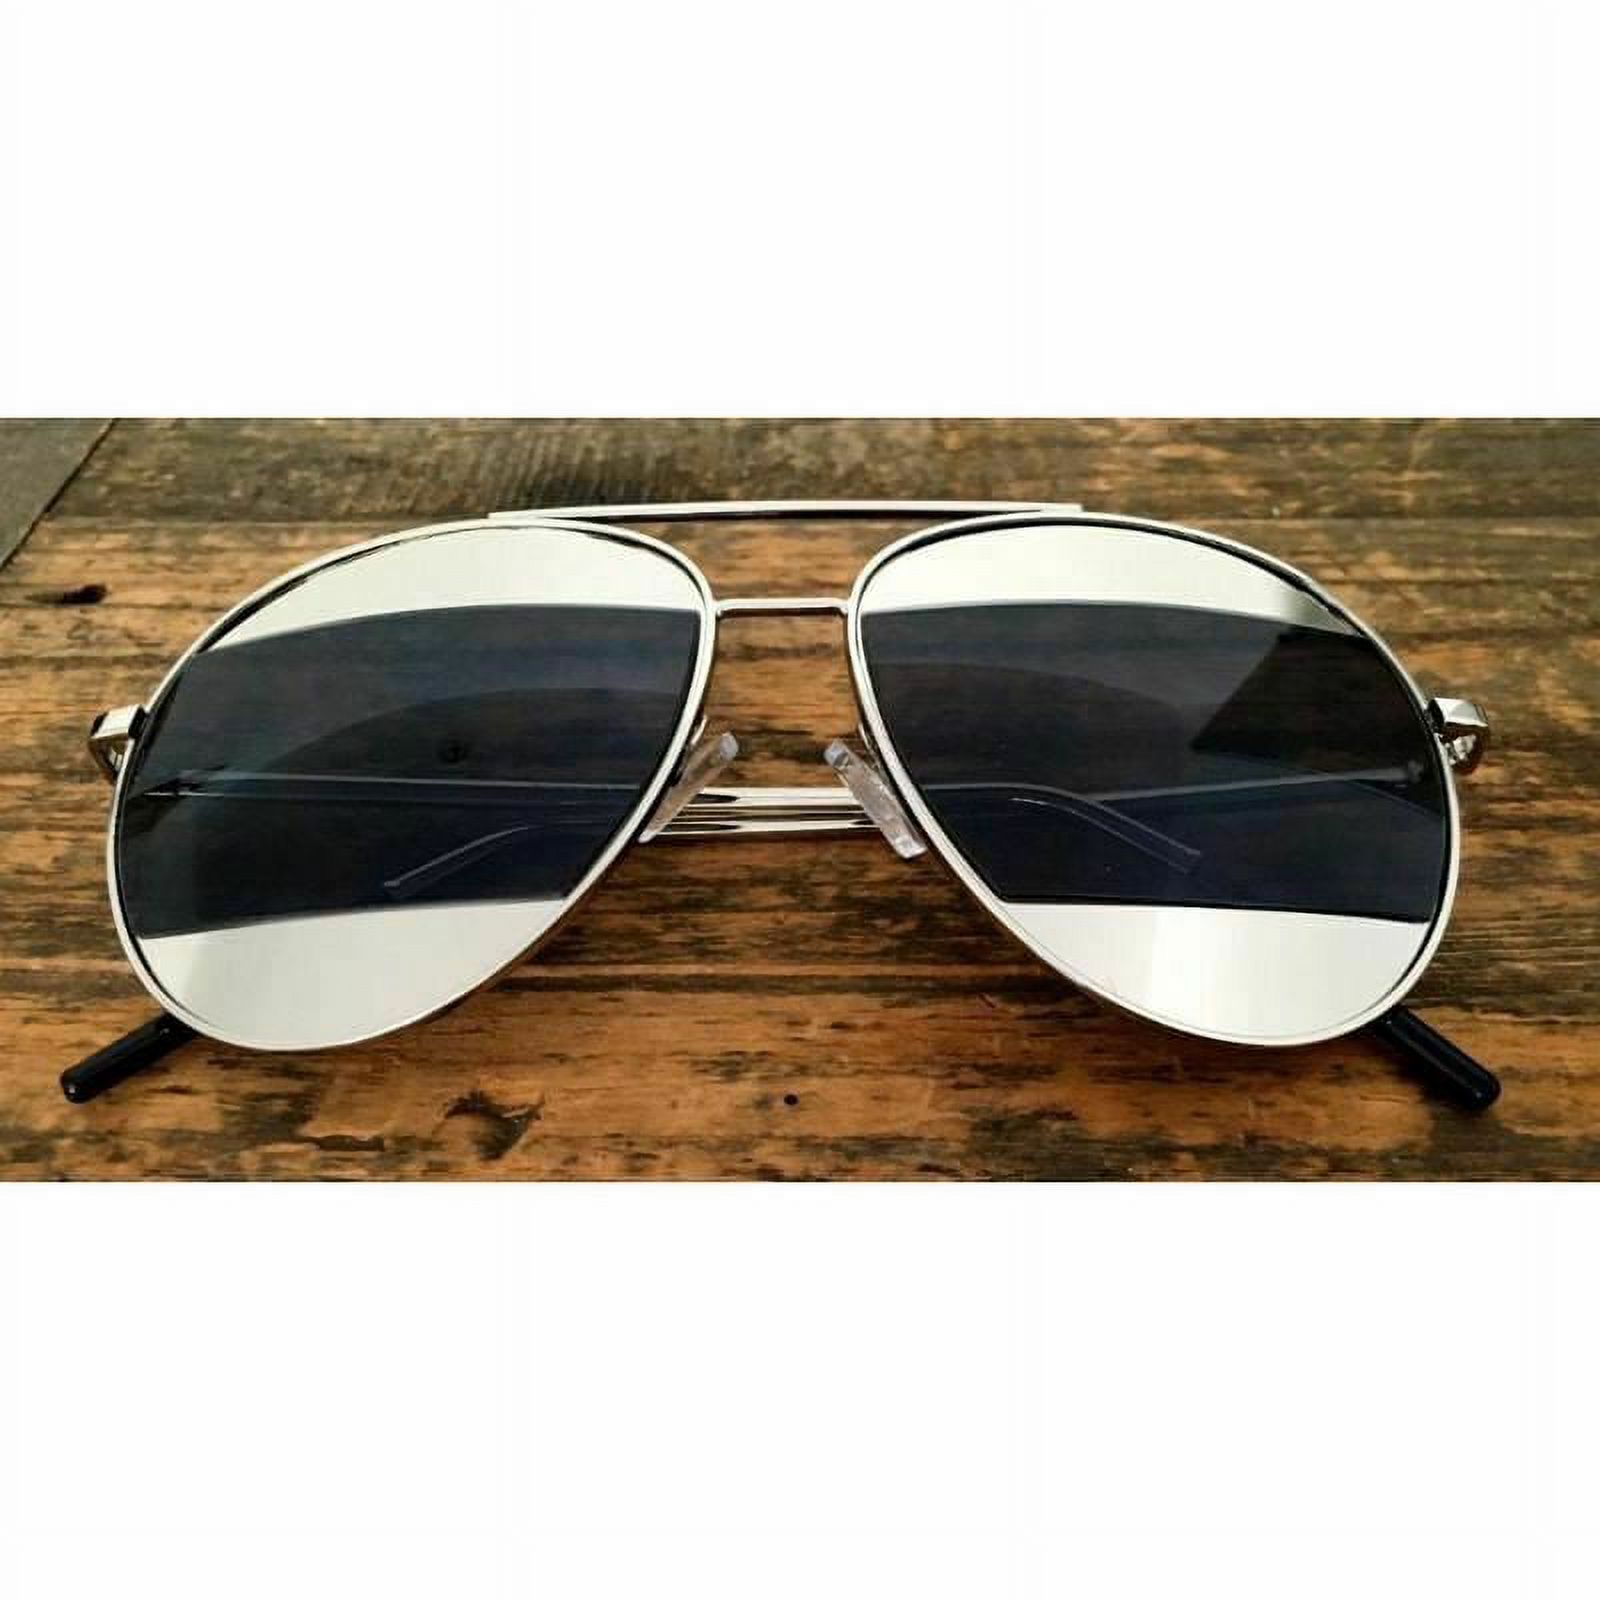 Women's Split Aviator Mirror Mirrored Reflective Large Ray Sunglasses Metal - Black Mirrored Lens, Silver Frame - image 1 of 2